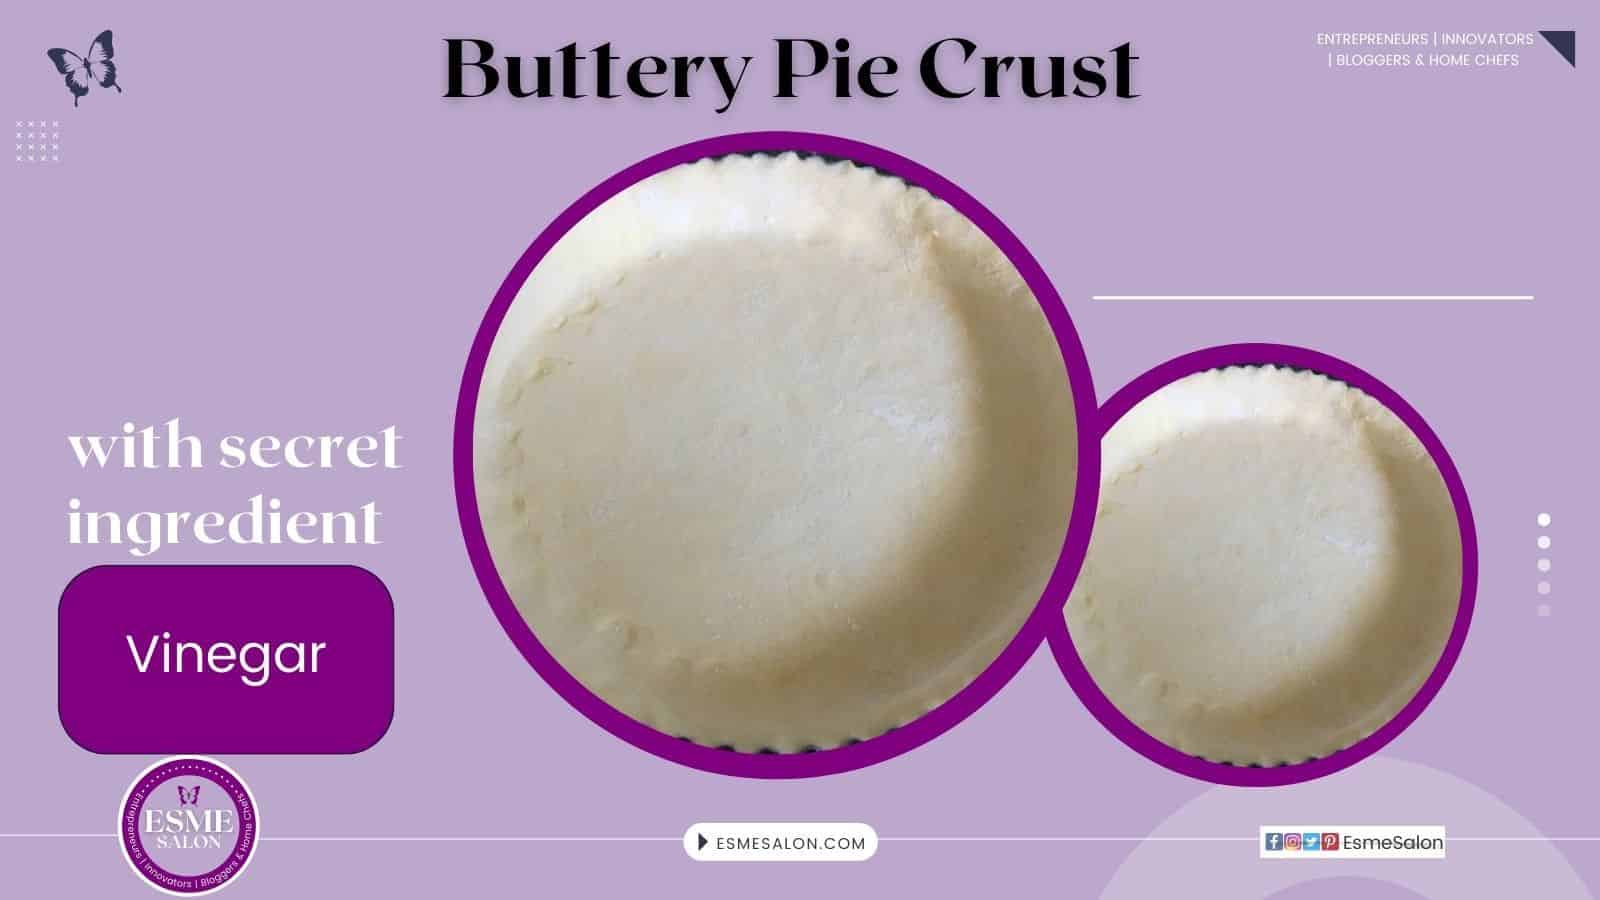 An image of a single Buttery Pie Crust with Vinegar